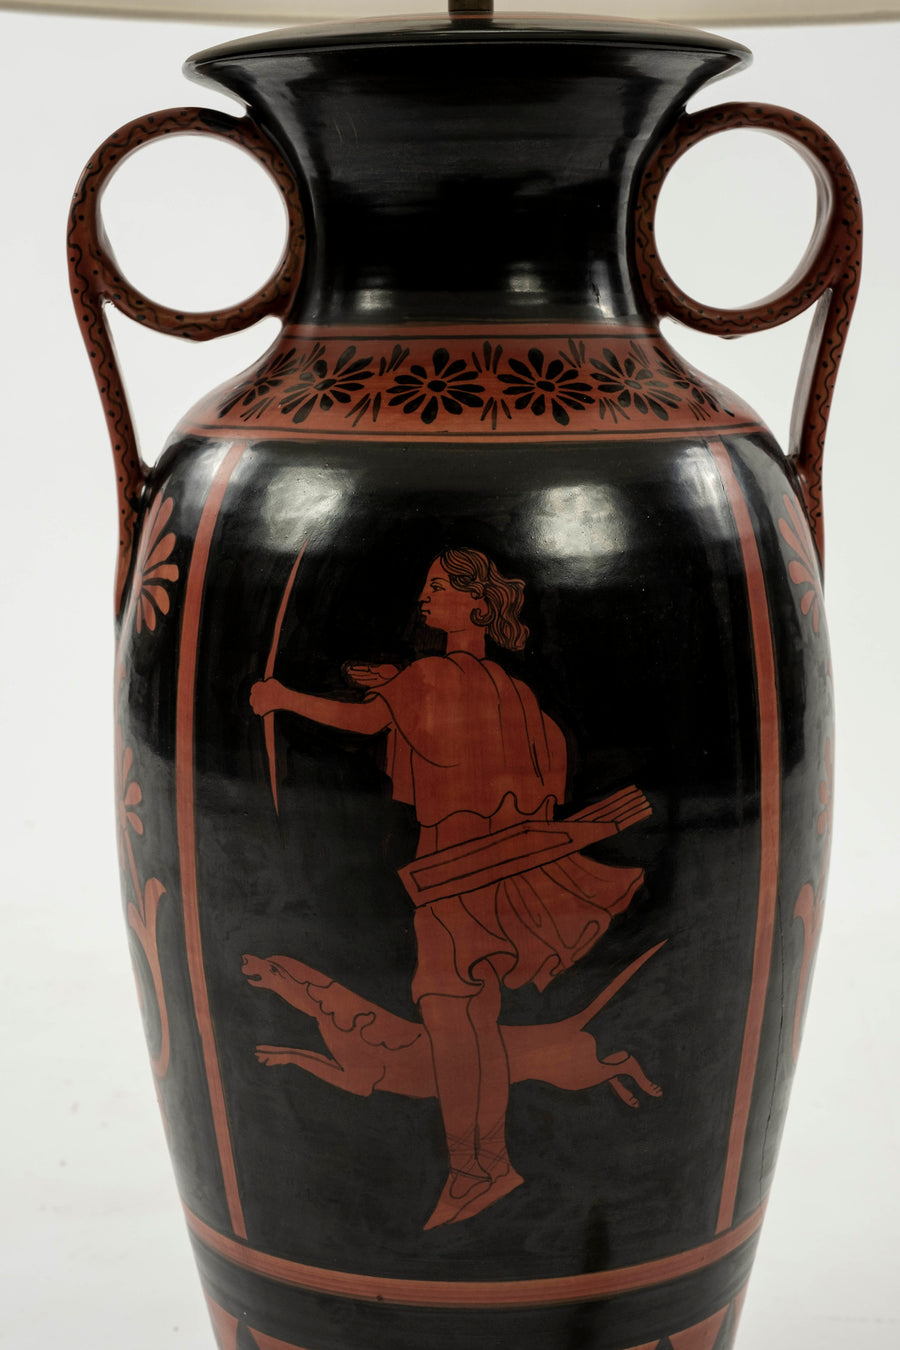 Up-close of the urn lamp's base featuring classic Etruscan artwork of a females archer with hunting dog painted in classic red on black.